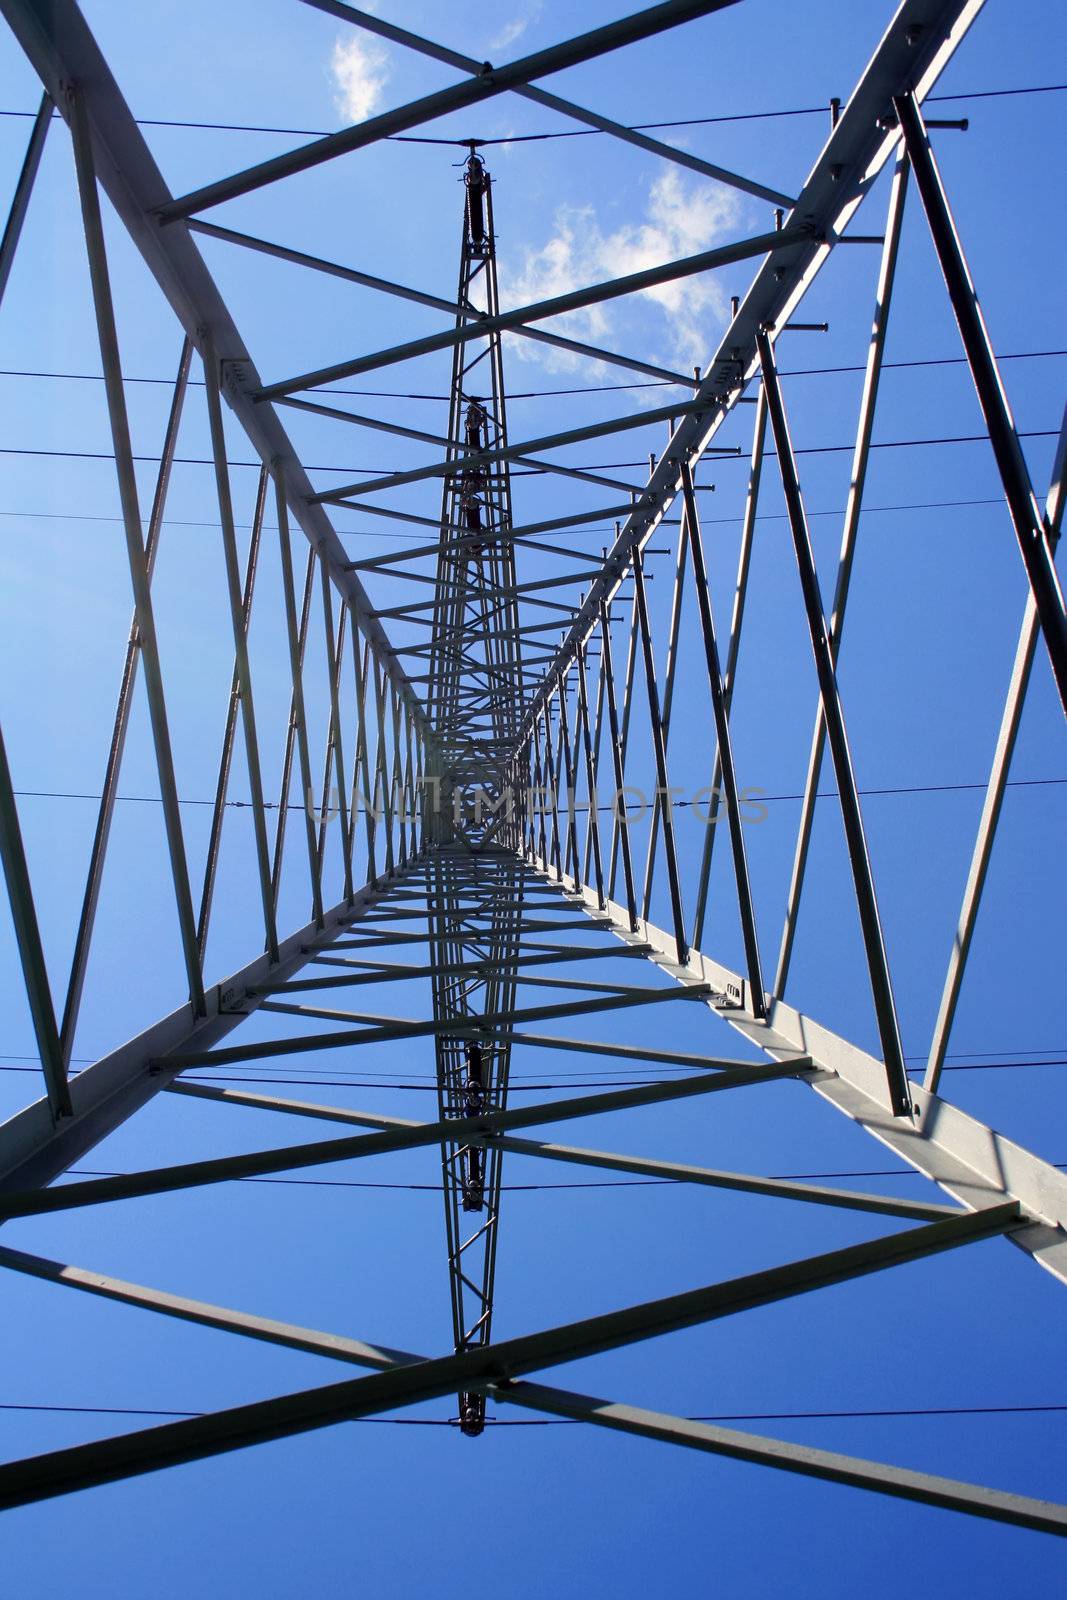 this image shows a inside view from power pole